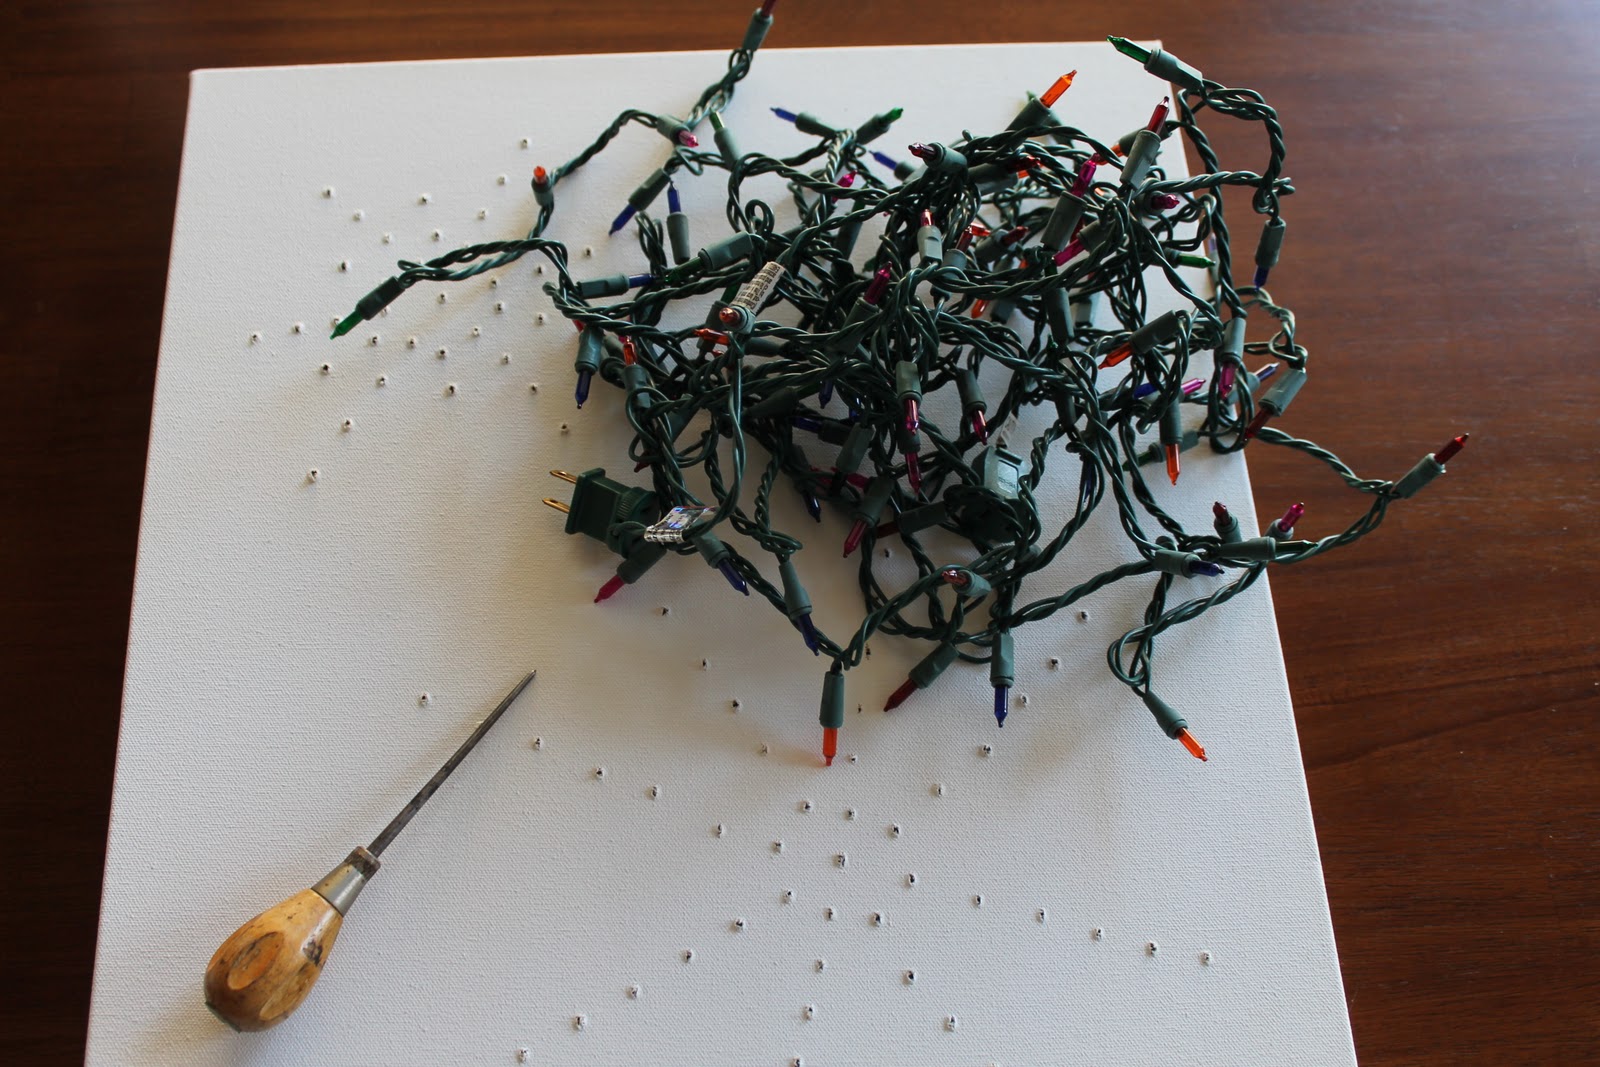 Desperate Craftwives: Christmas Light Canvas